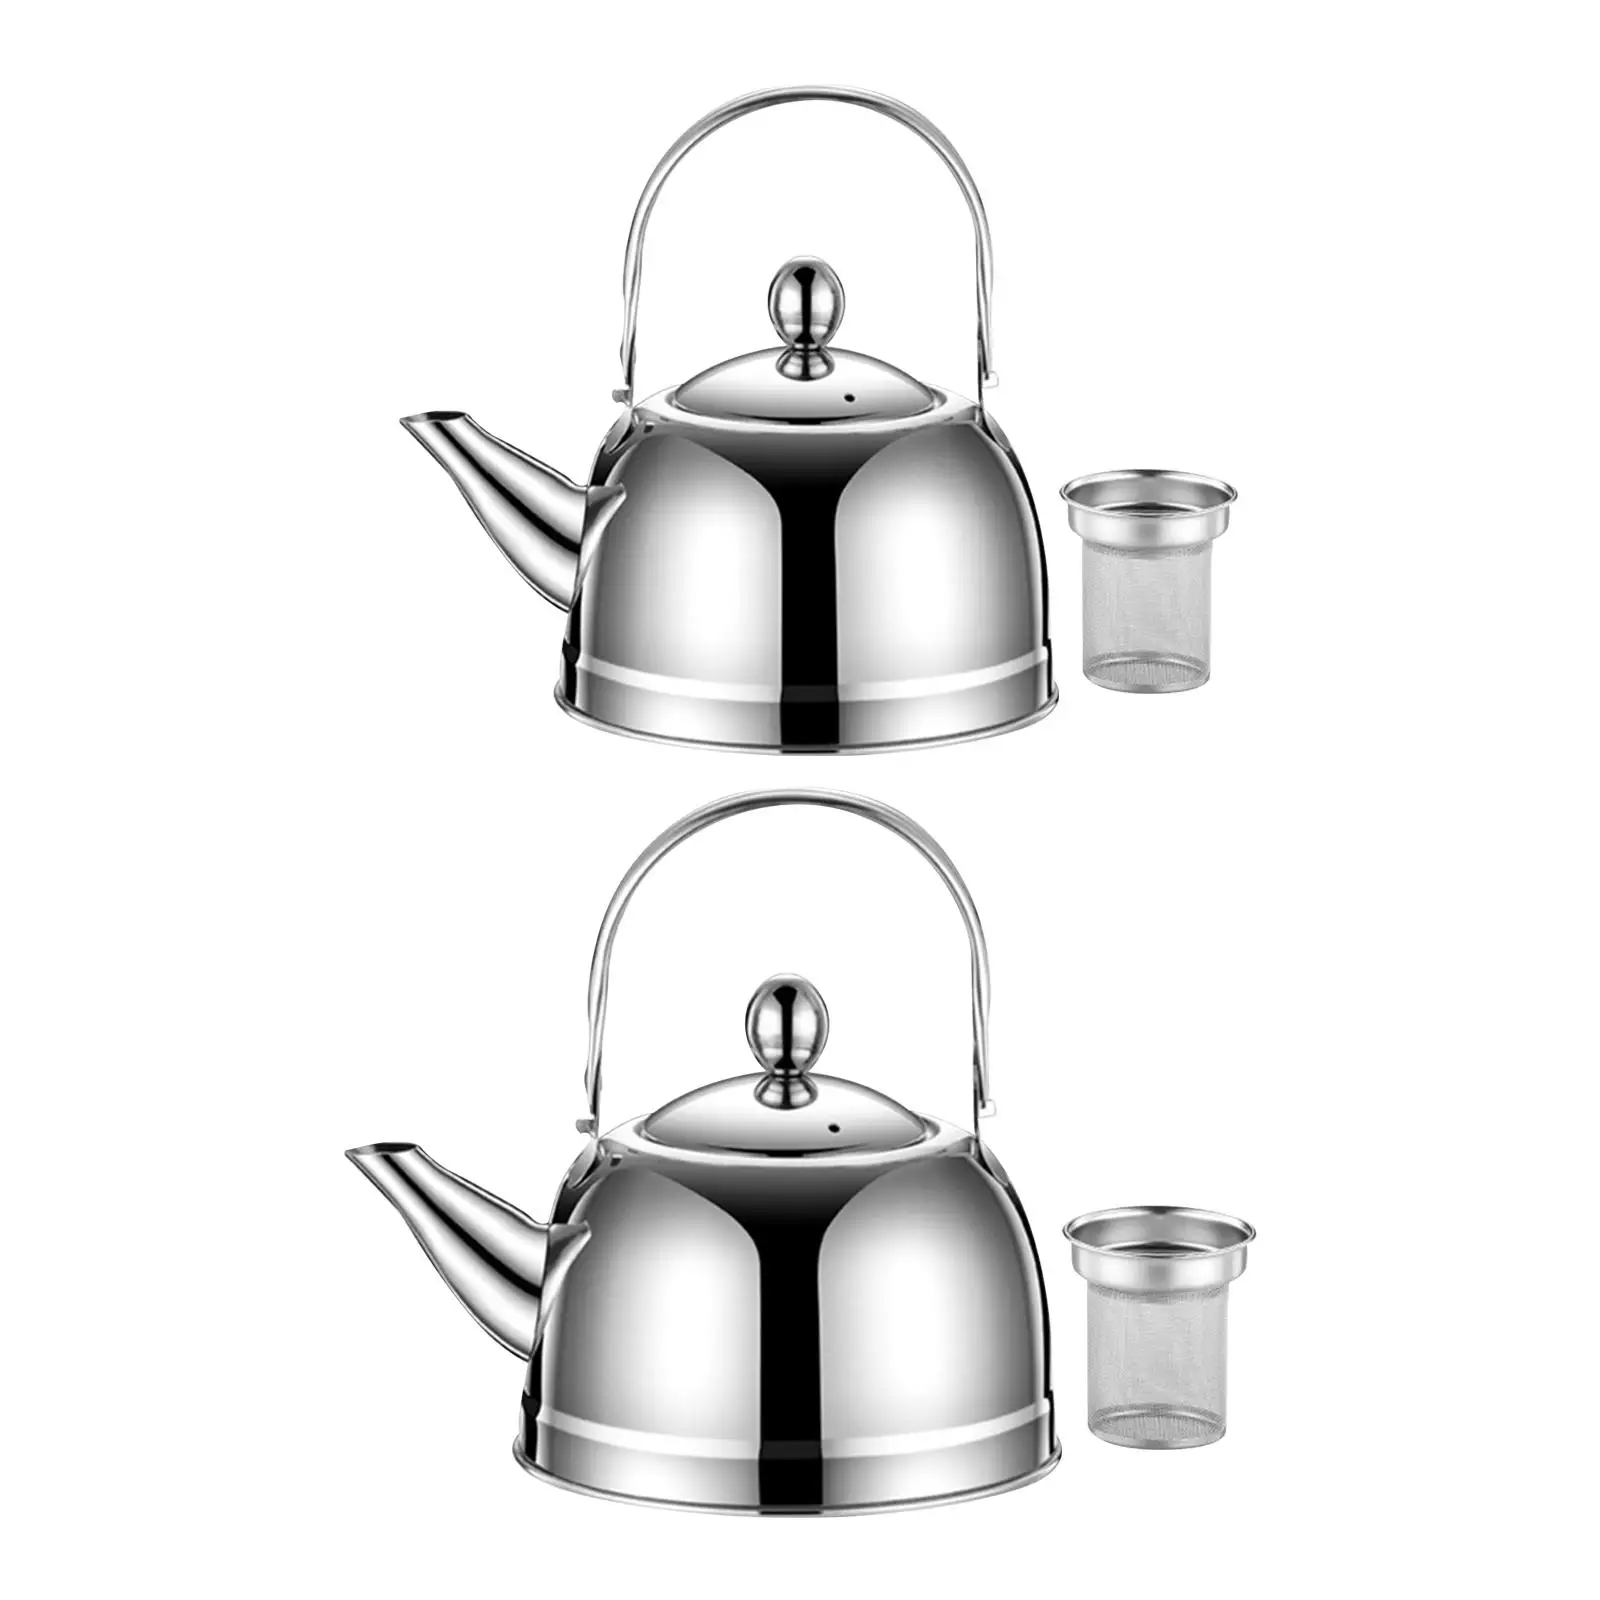 Portable Tea Kettle with Infuser Tea Pot Large Capacity for Picnic Hiking Kitchen Restaurant